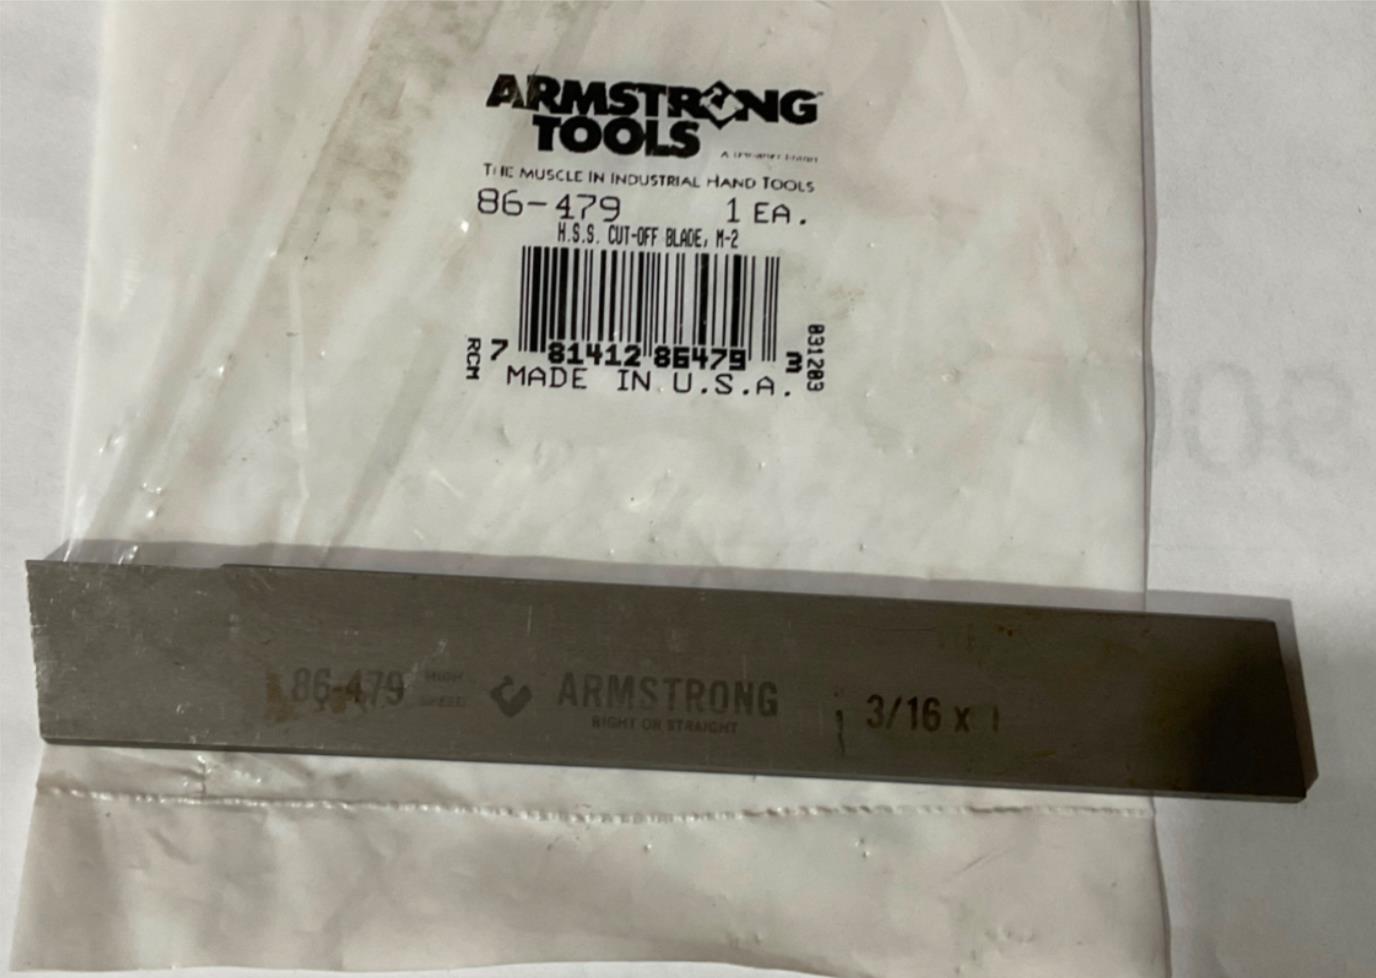 Armstrong 86-479 H.S.S. Cut Off Blade M-2, 3/16 X 1 USA